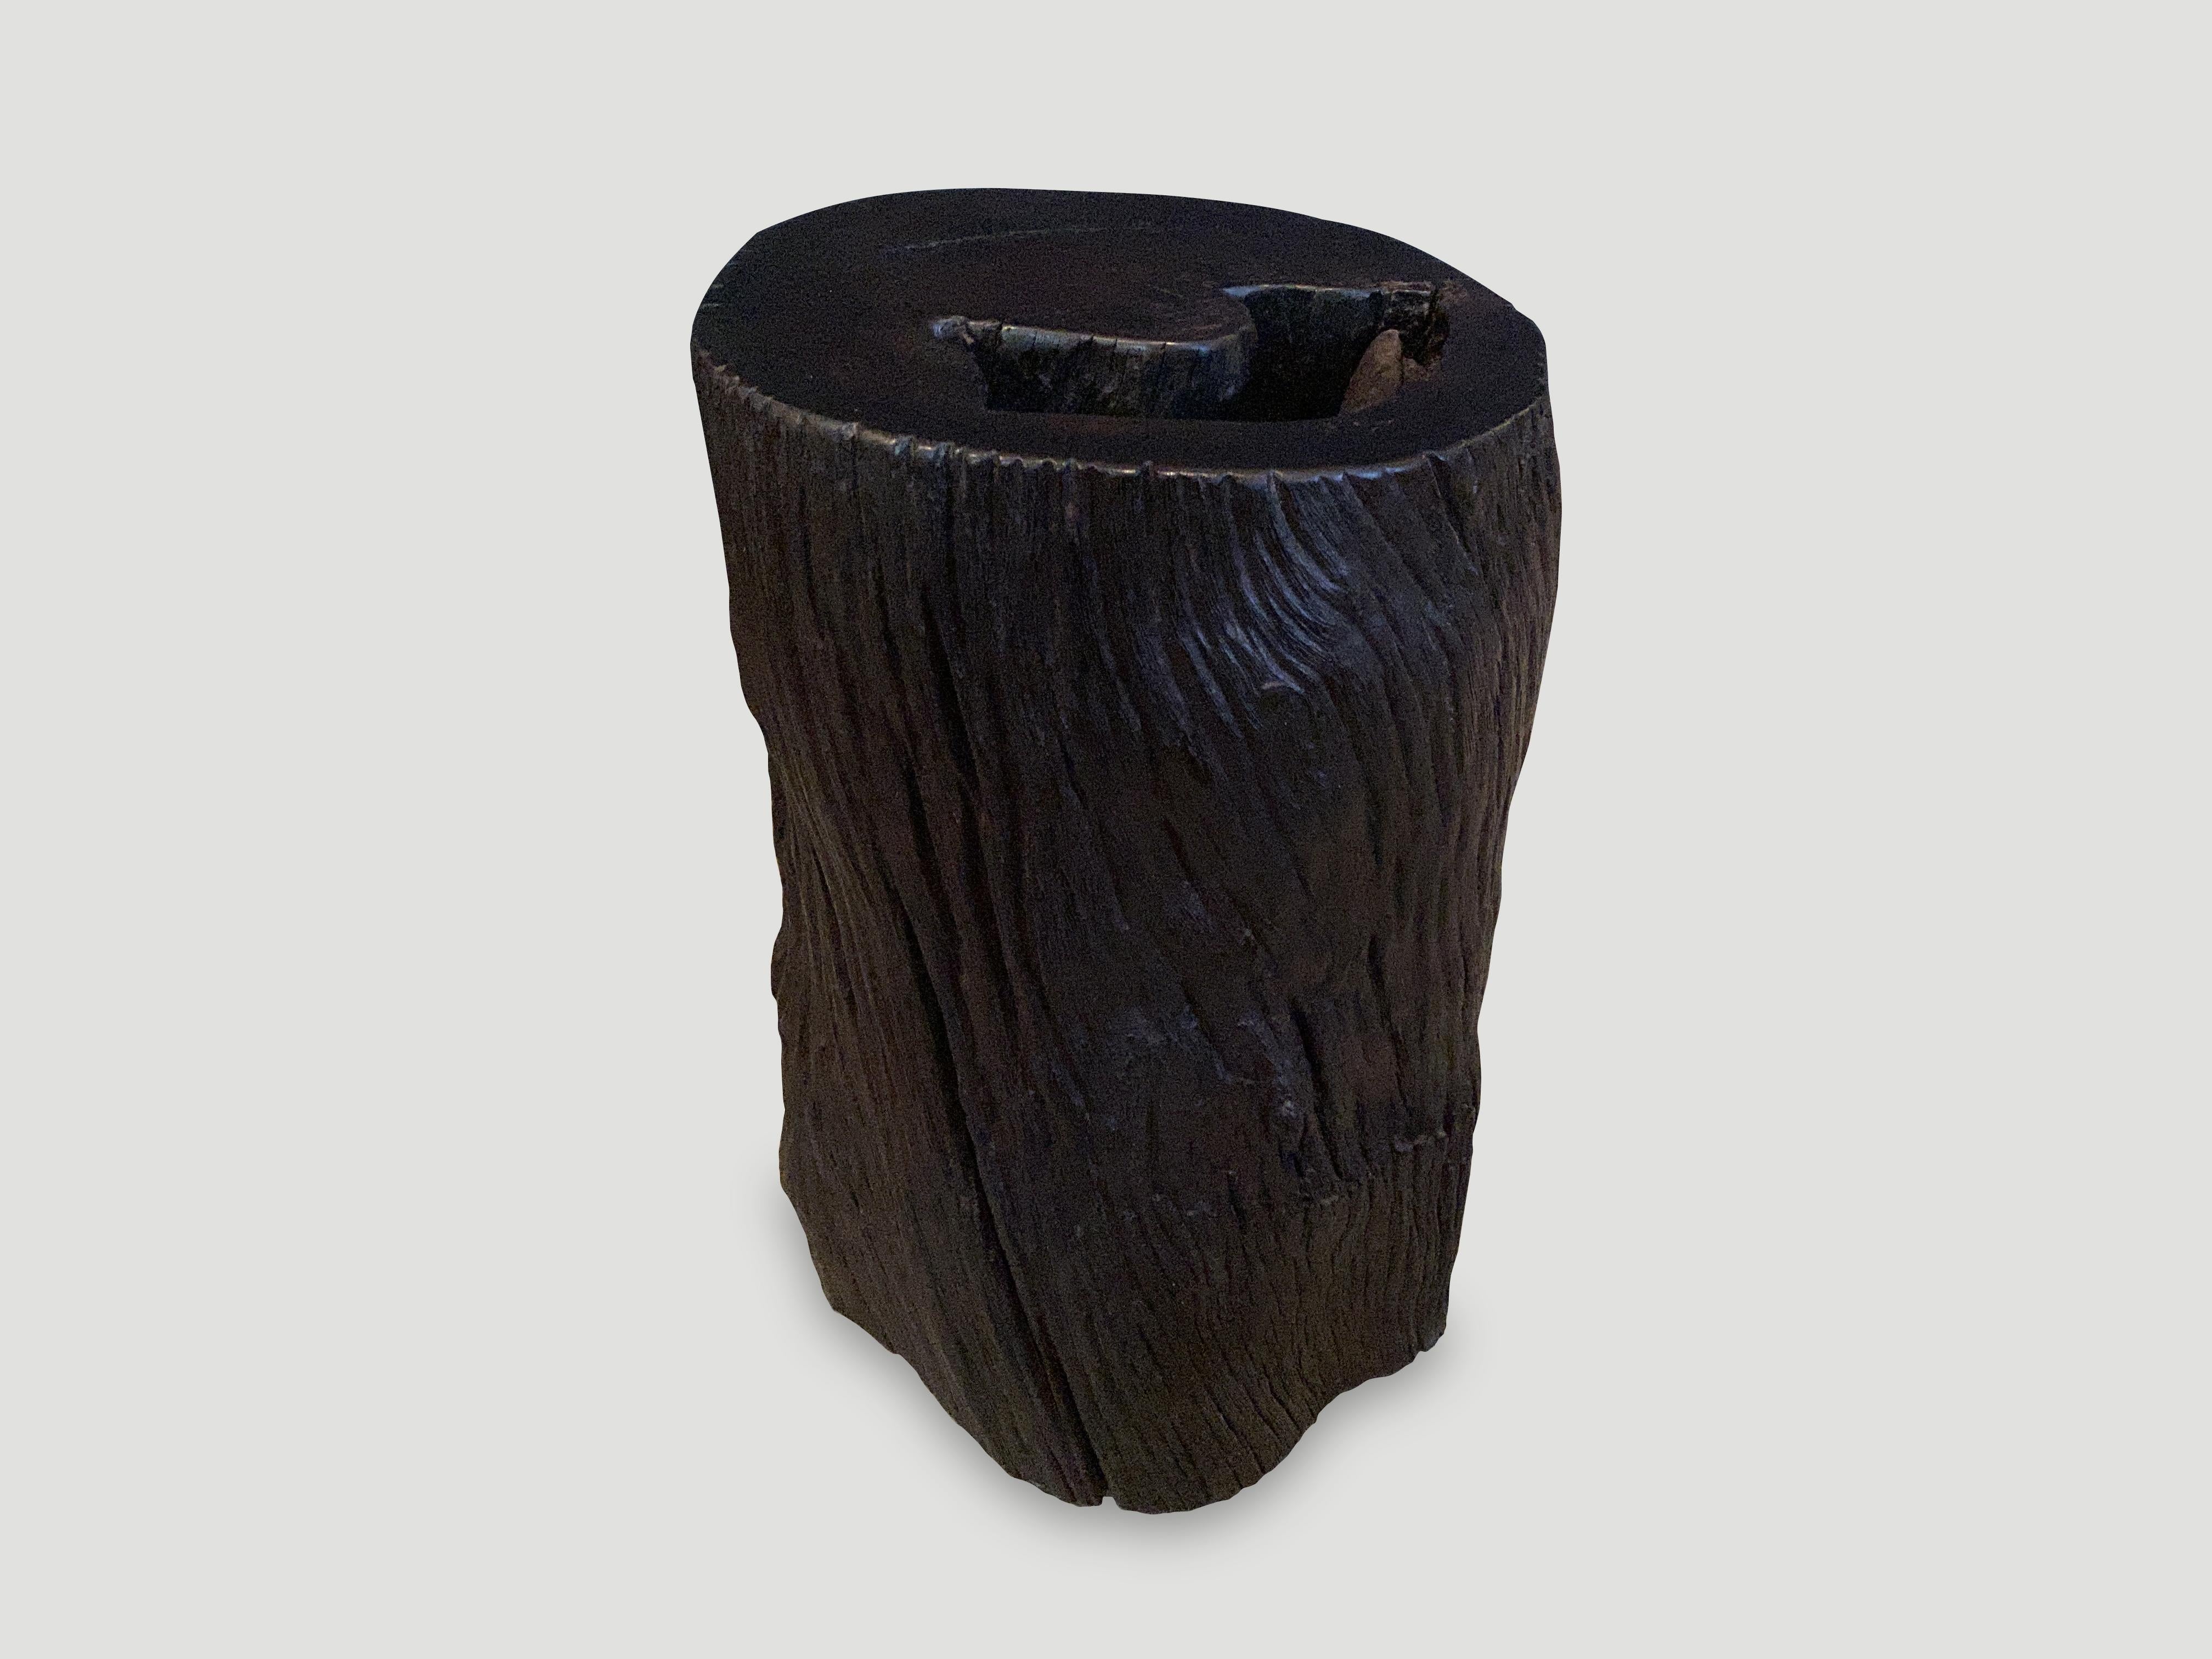 Reclaimed Ulin wood cylinder side table or stool. Also known as Iron wood. Charred sanded and sealed and carved into a minimalist shape whilst respecting the natural organic wood. We added a polish revealing the beautiful wood grain. We have a